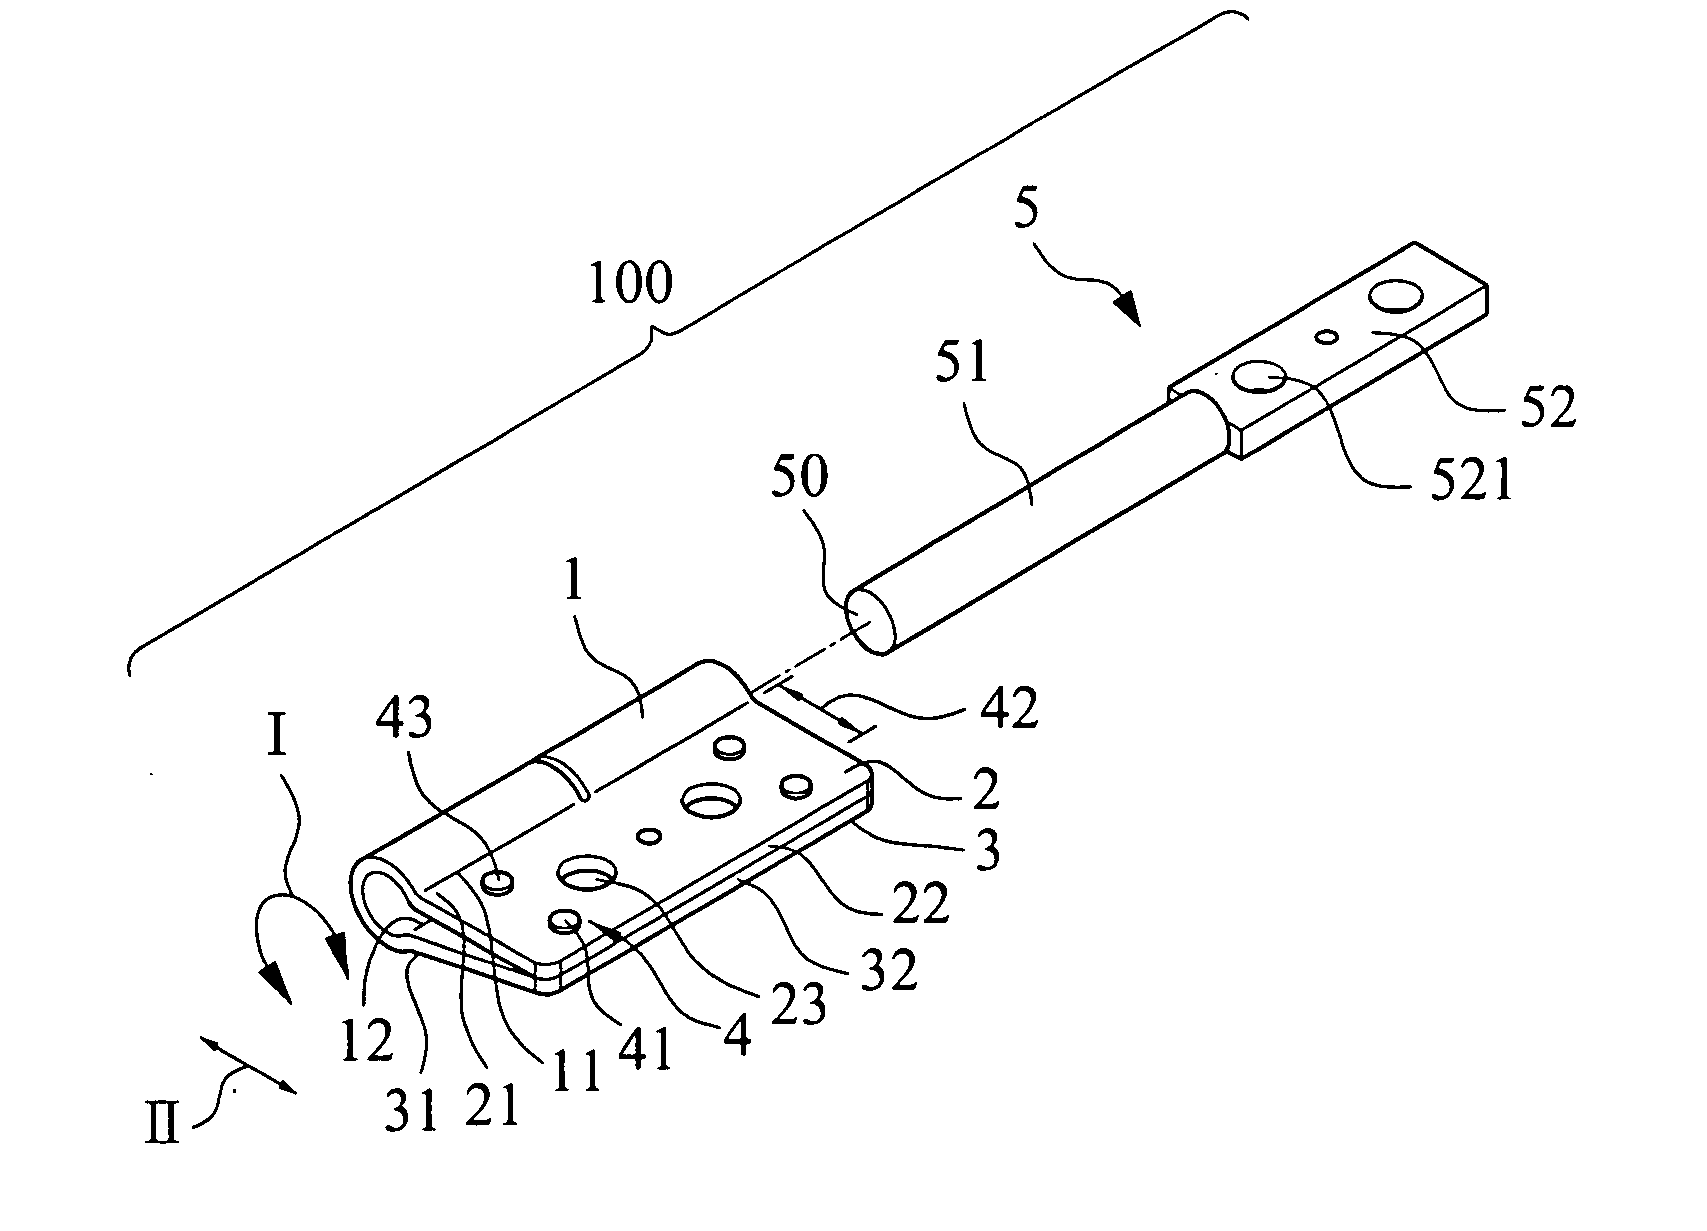 Hinge structure having leaf portions with adjustable clamping force arm